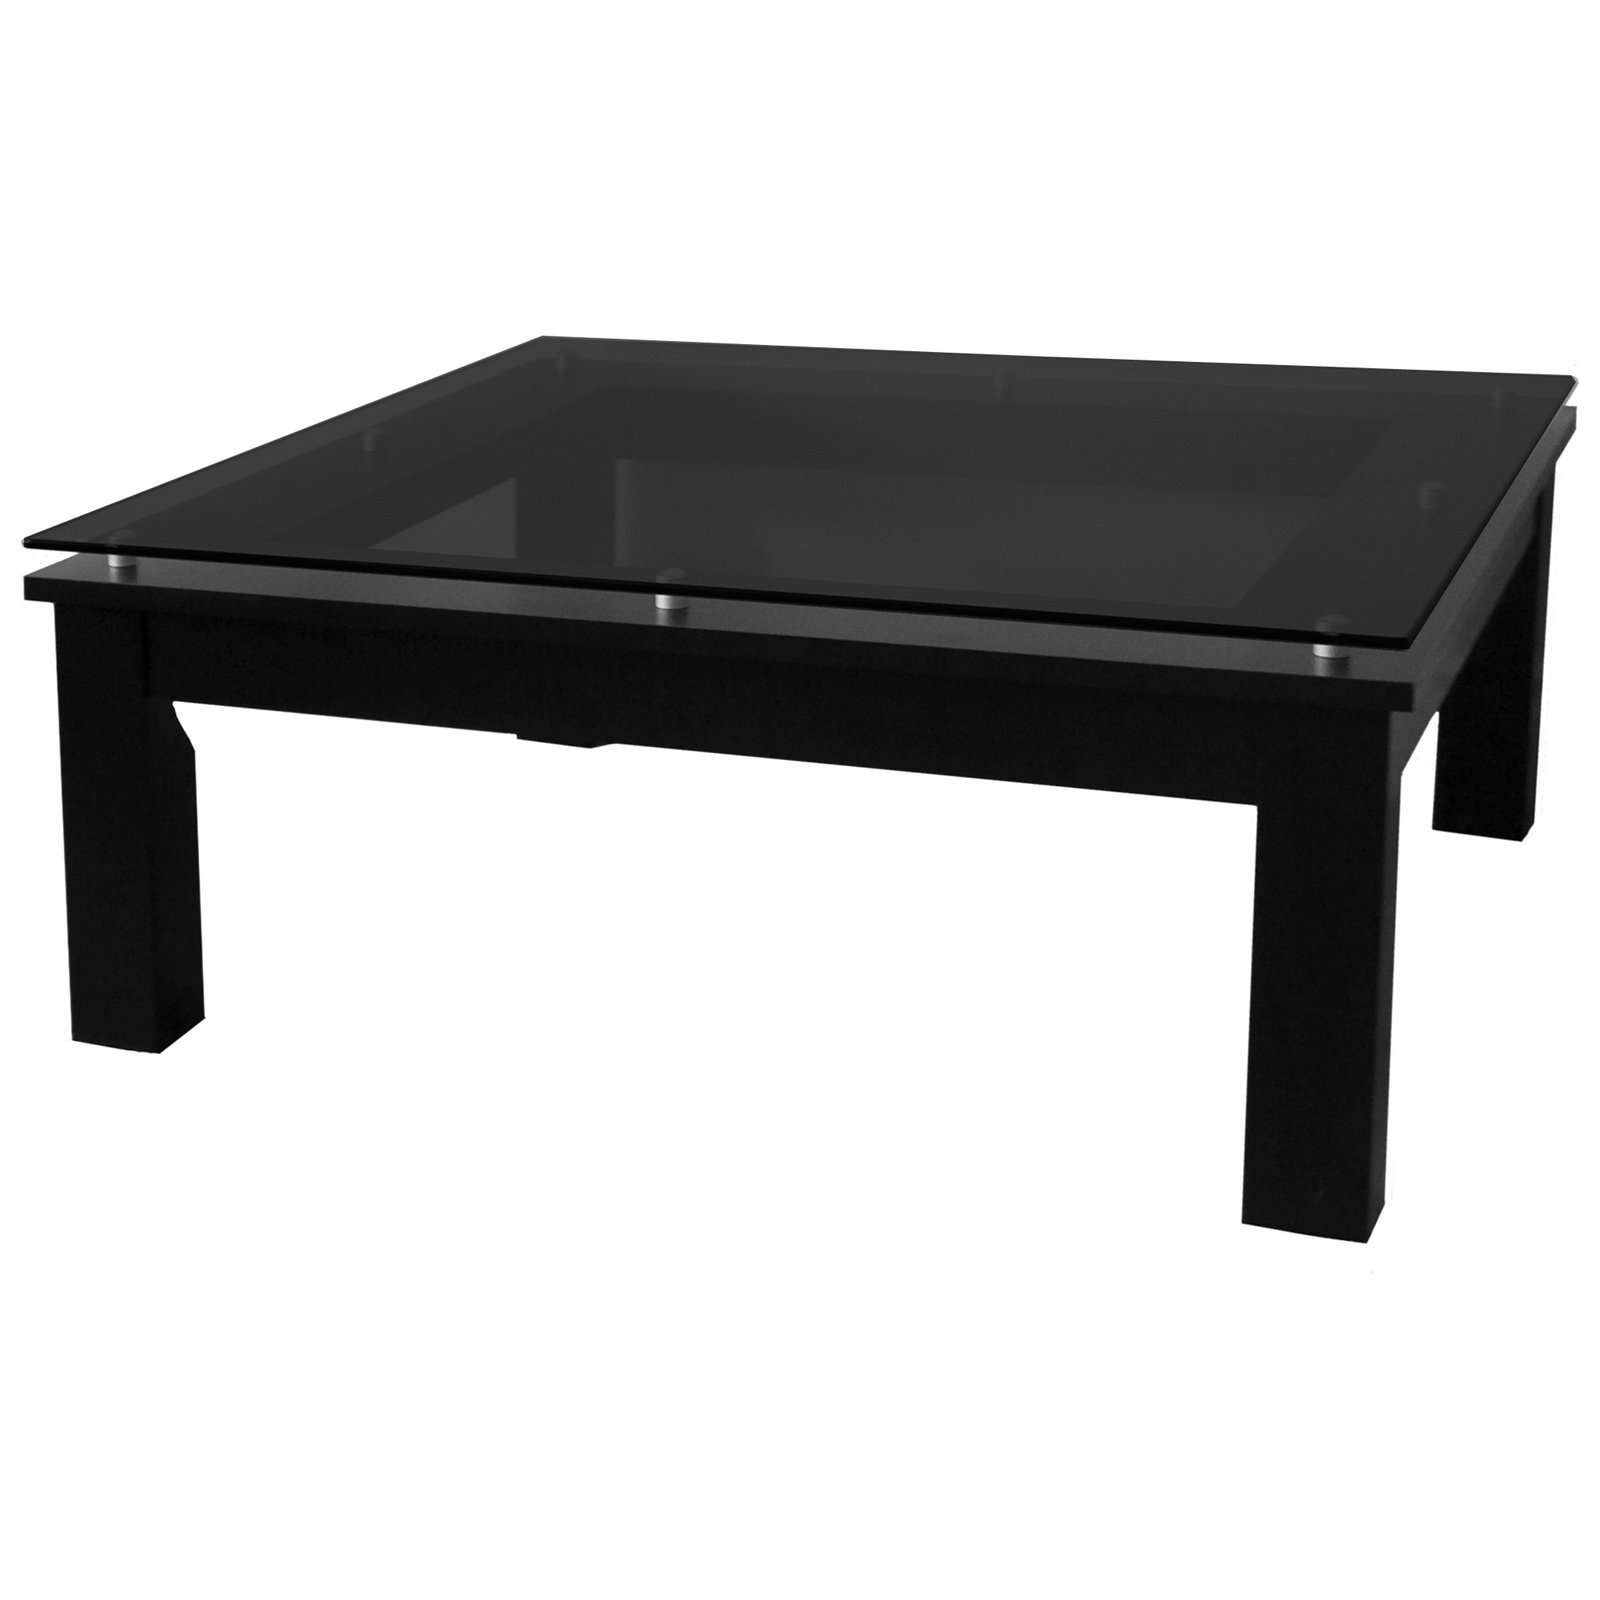 Well Liked Square Black Coffee Tables Regarding Coffee Tables Ideas: Wonderful Black Coffee Tables With Storage (View 2 of 20)